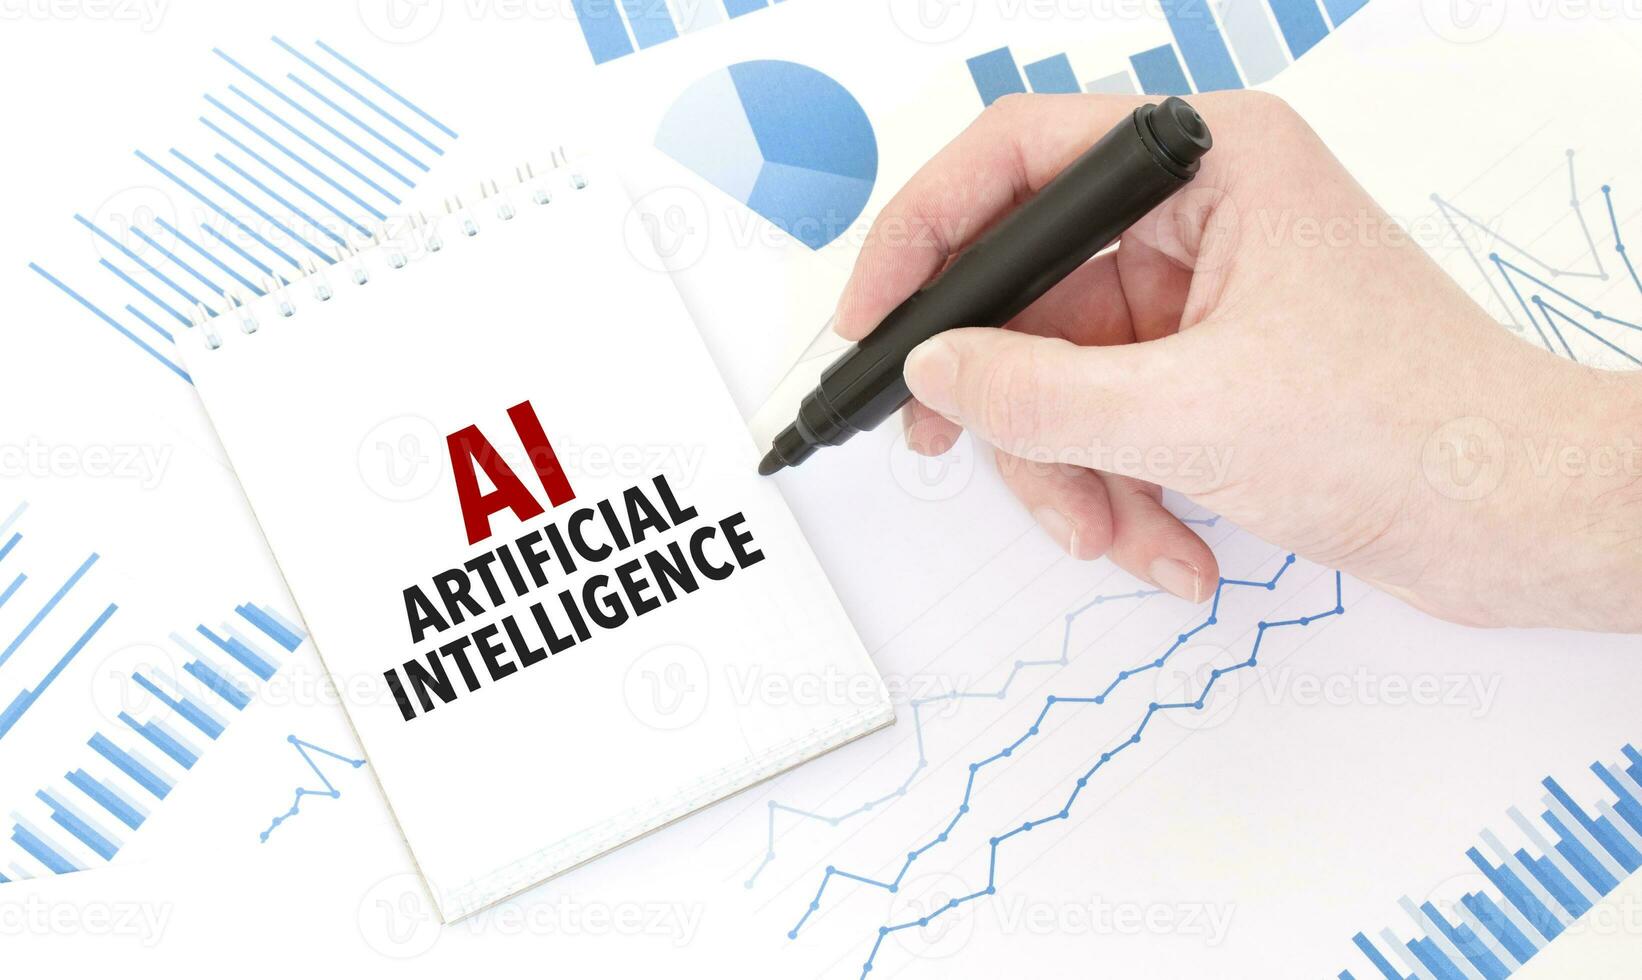 Businessman holding a black marker, notepad with text AI - Artificial Intelligence, business concept photo